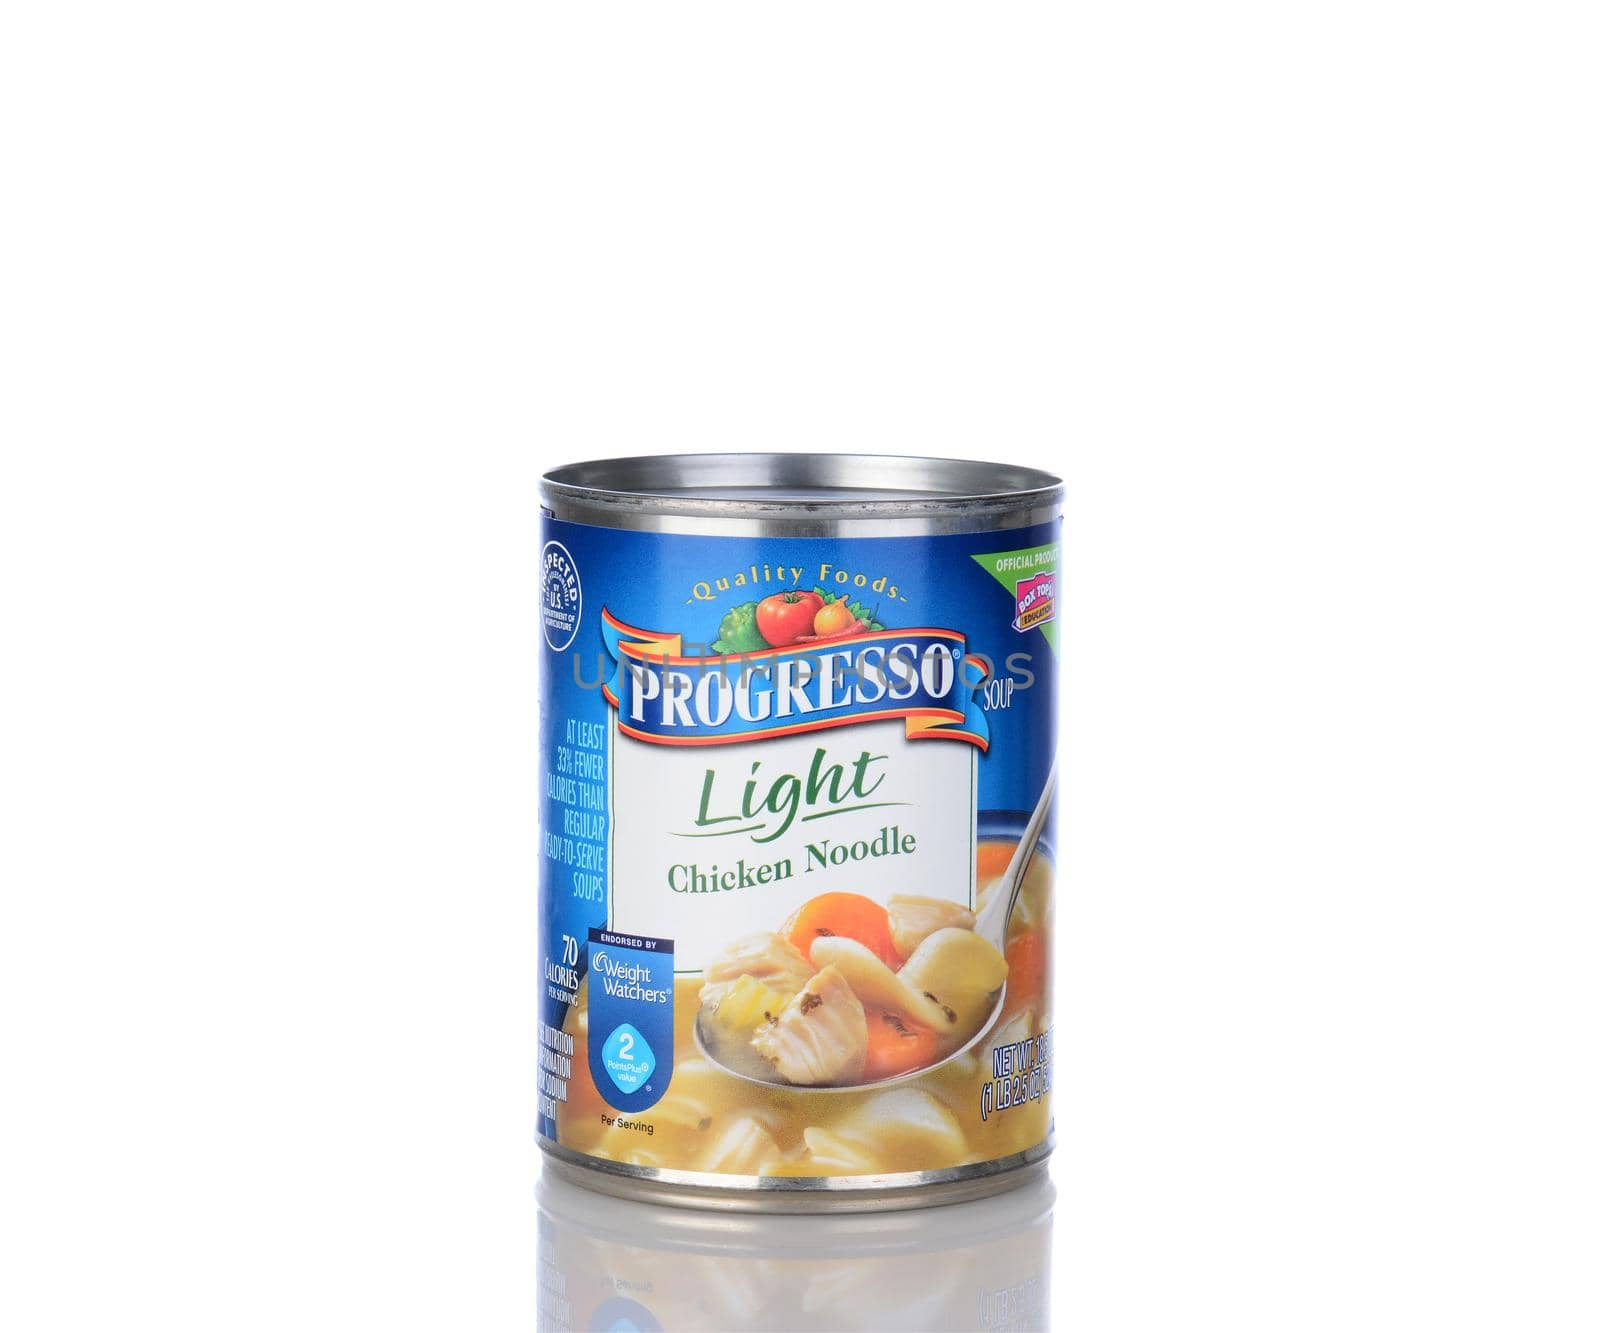 IRVINE, CA - January 05, 2014: A can of Progresso Light Soup Chicken Noodle. Progresso, owned by General Mills has been making soups for over 90 years.